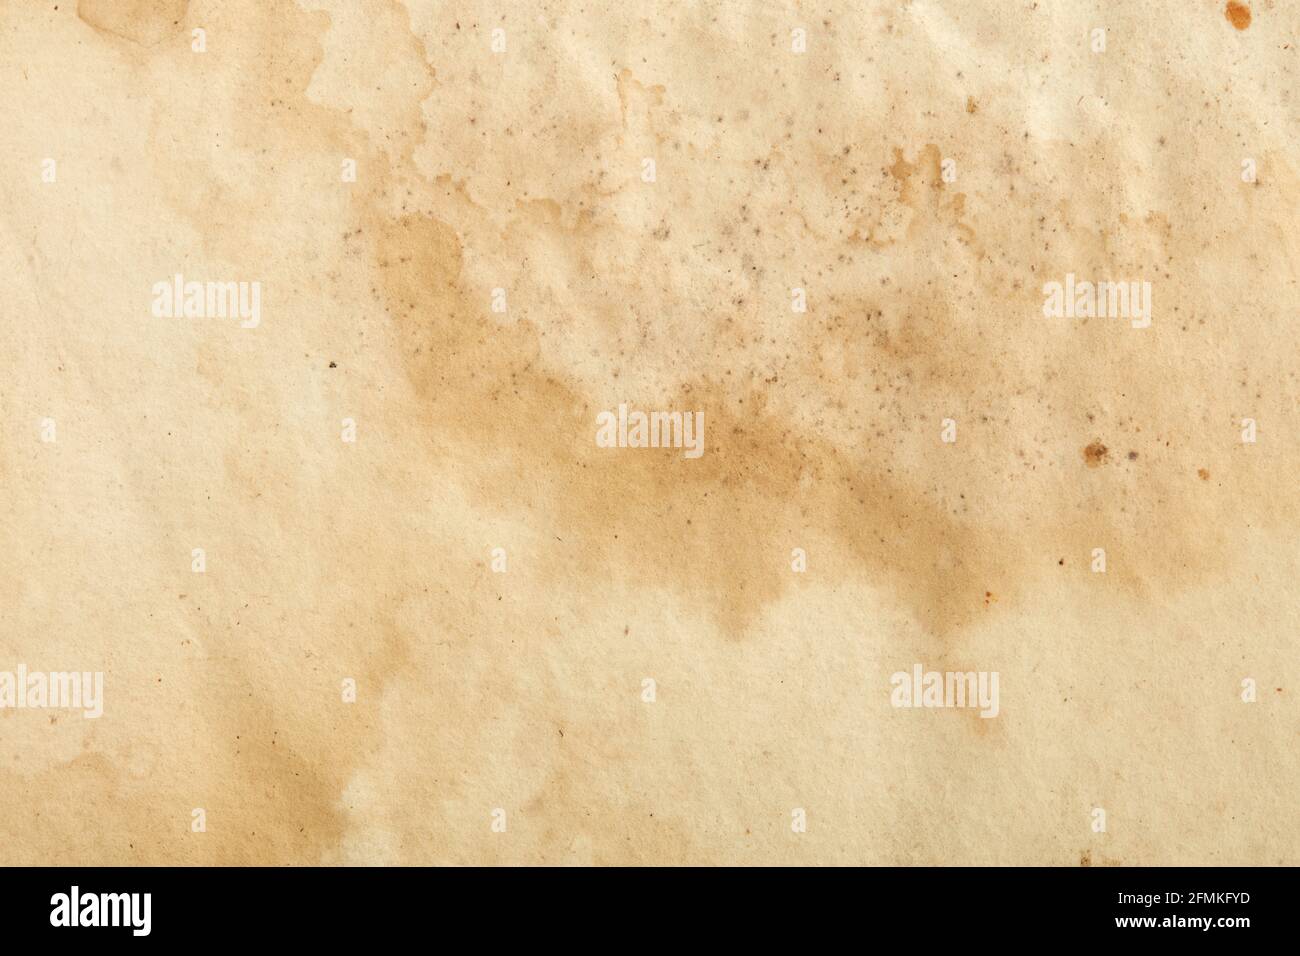 Old paper with mold and humidity signs texture background Stock Photo